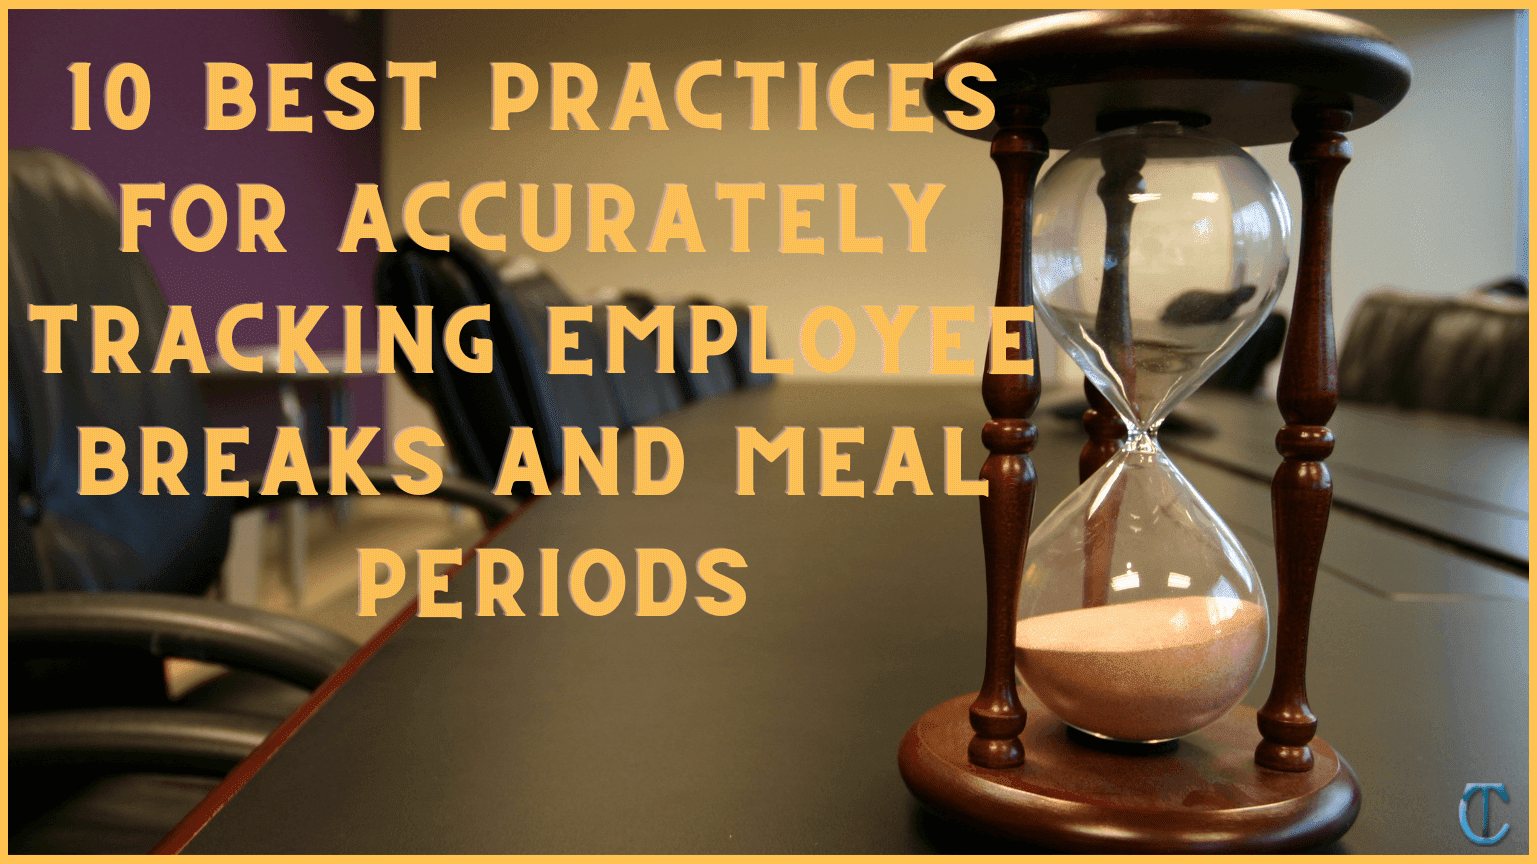 10 Best Practices for Accurately Tracking Employee Breaks and Meal Periods